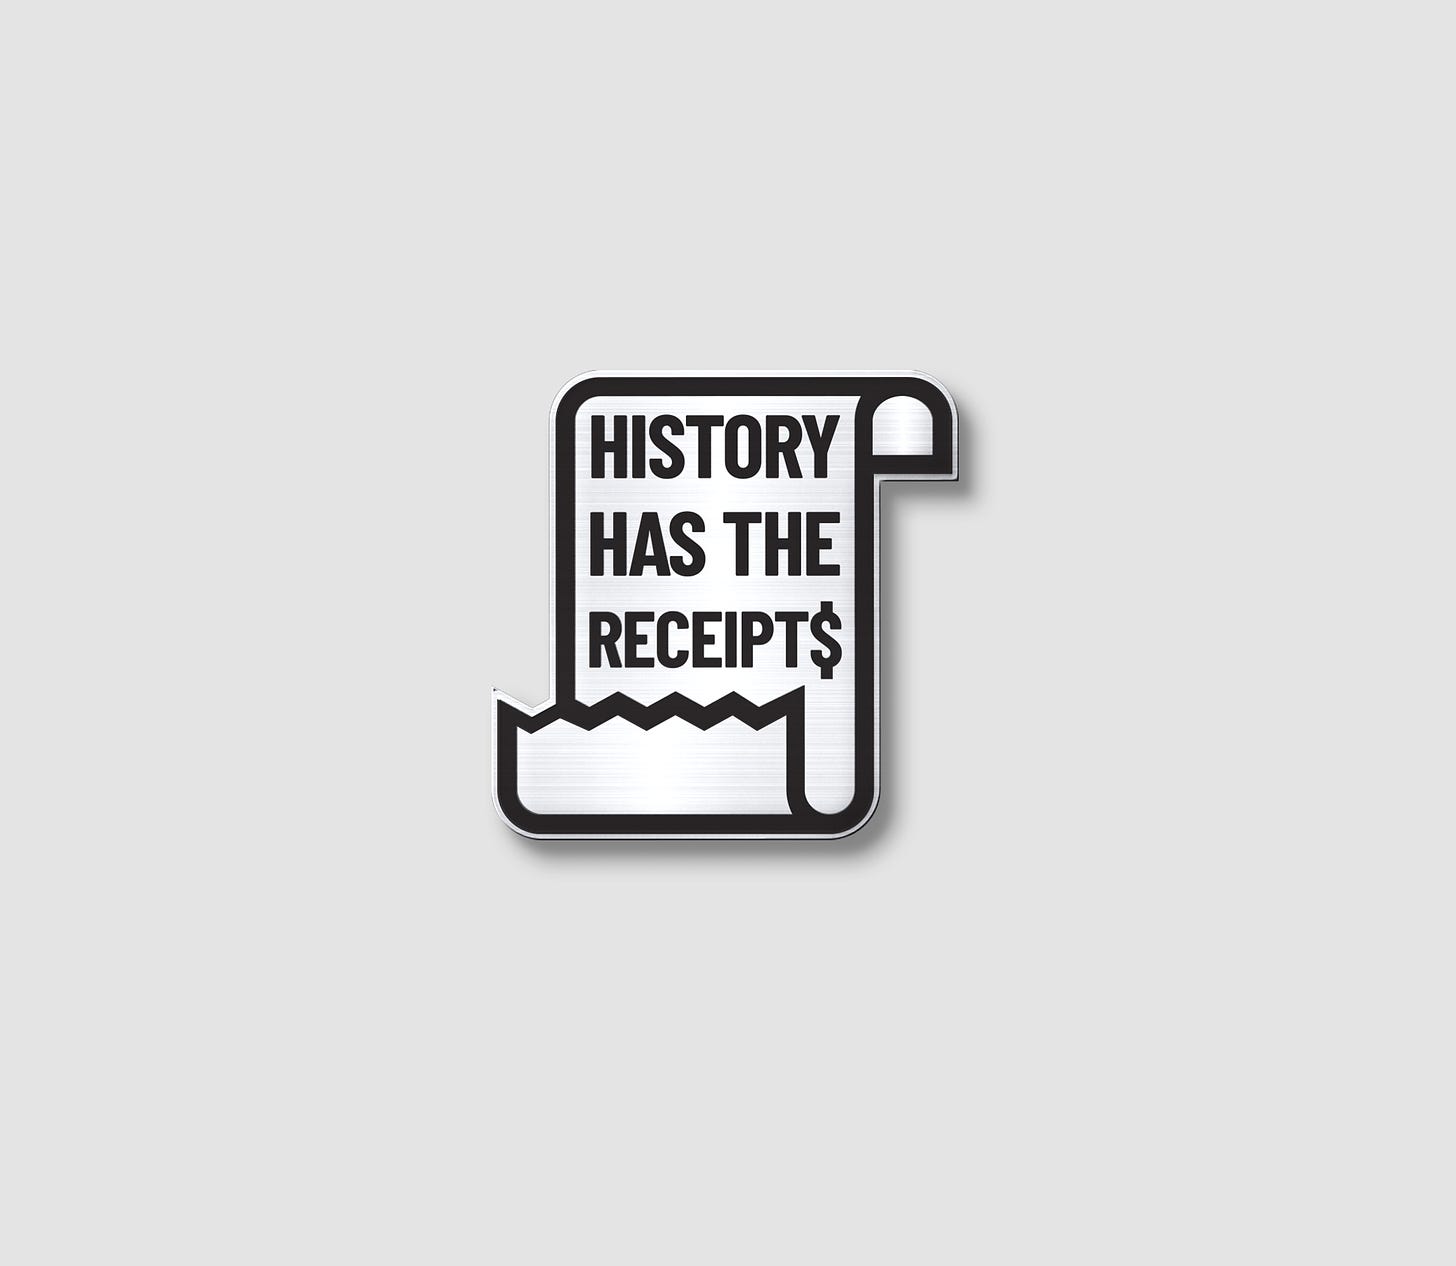 picture of a nickel-plated lapel pin that says history has the receipts: justicetakessides.com